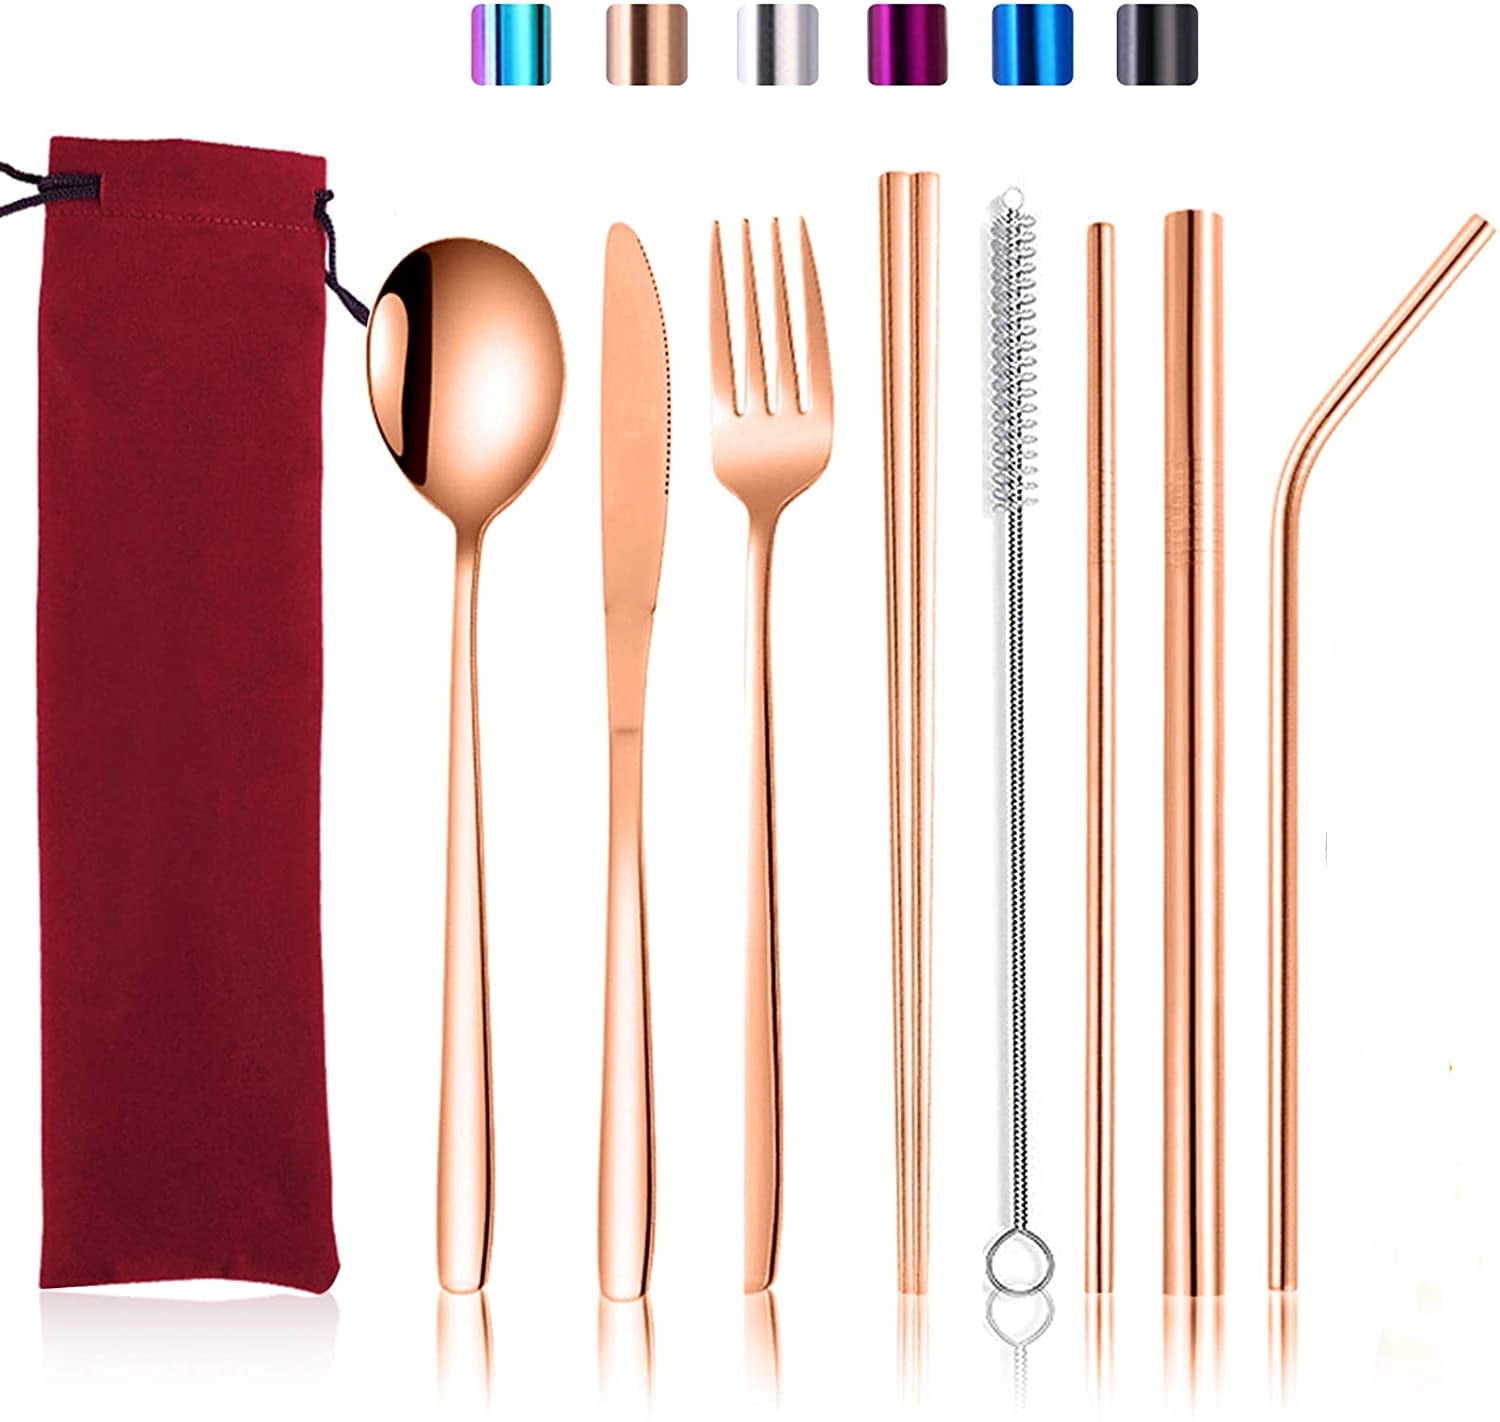 Fork Matte Copper Travel Utensils with Case Cleaning Brush Chopsticks Metal Portable Camping Cutlery Flatware Set Includes Knife Spoon E-far 8-Piece Reusable Travel Silverware Set Straws 